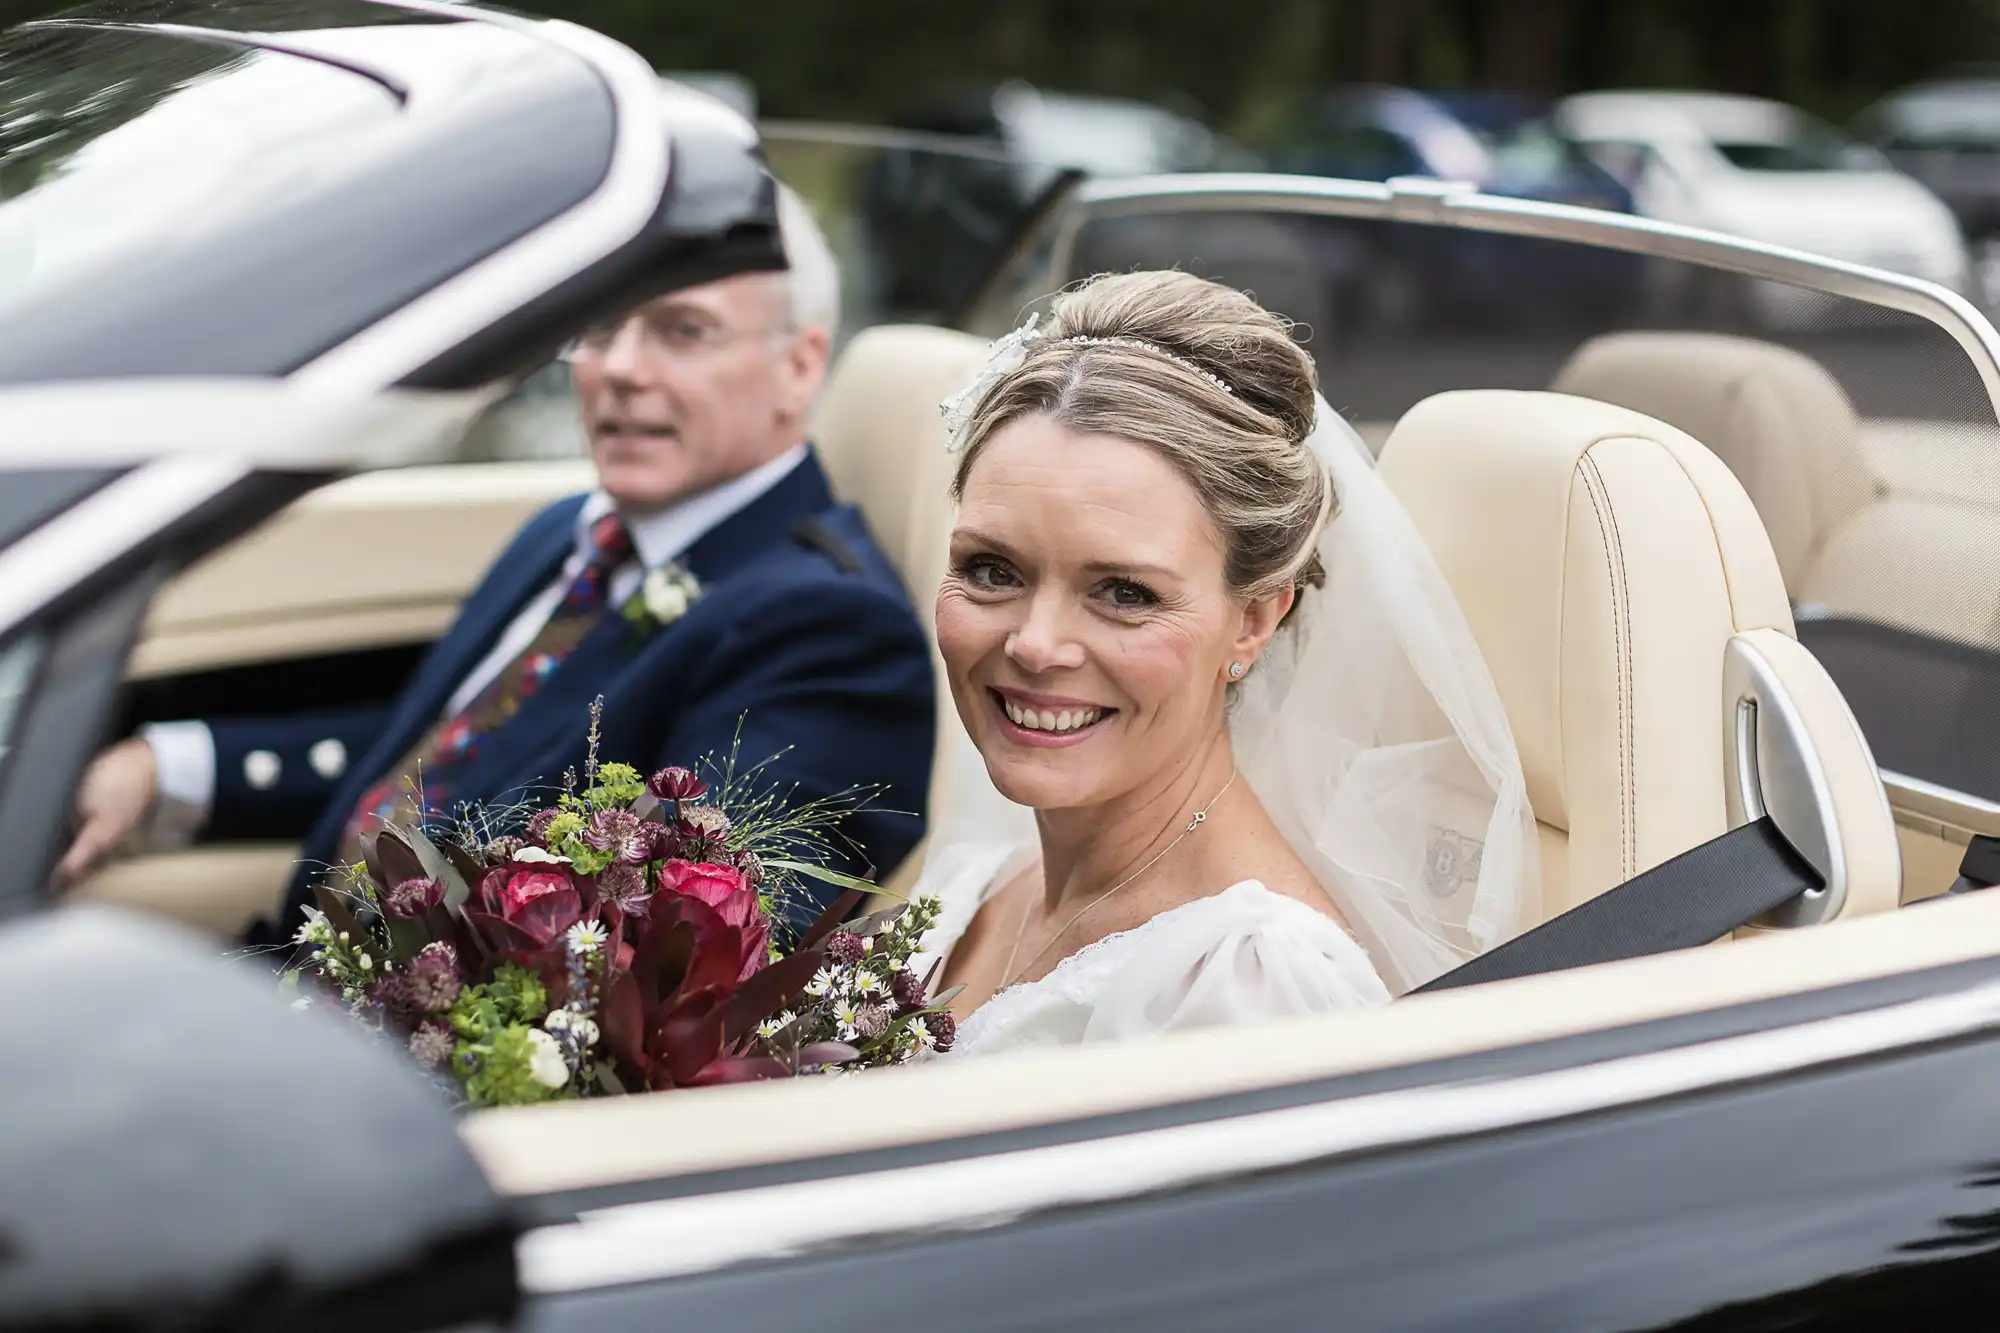 A bride smiling in a convertible car with an older man driving, both dressed formally for a wedding, surrounded by trees.